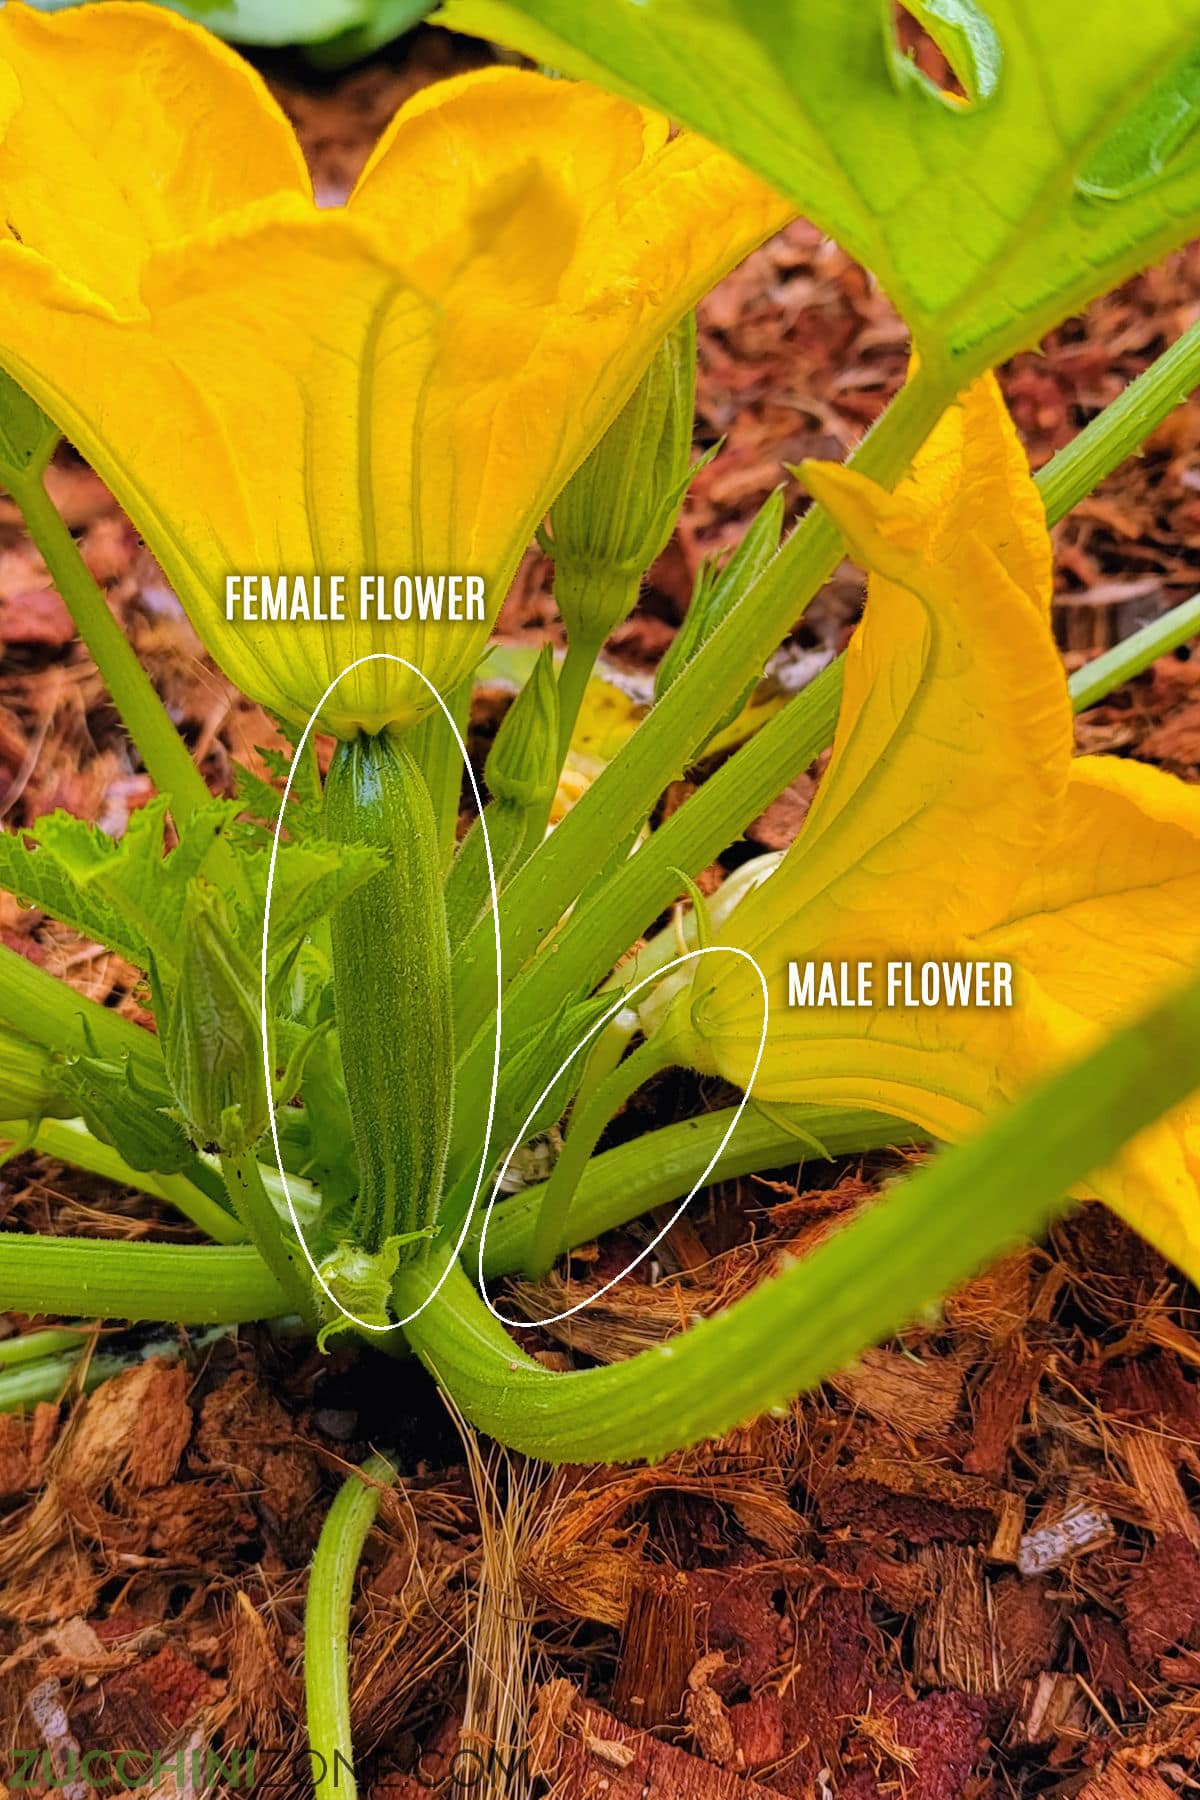 A graphic showing a male zucchini flower and female zucchini flower side by side.